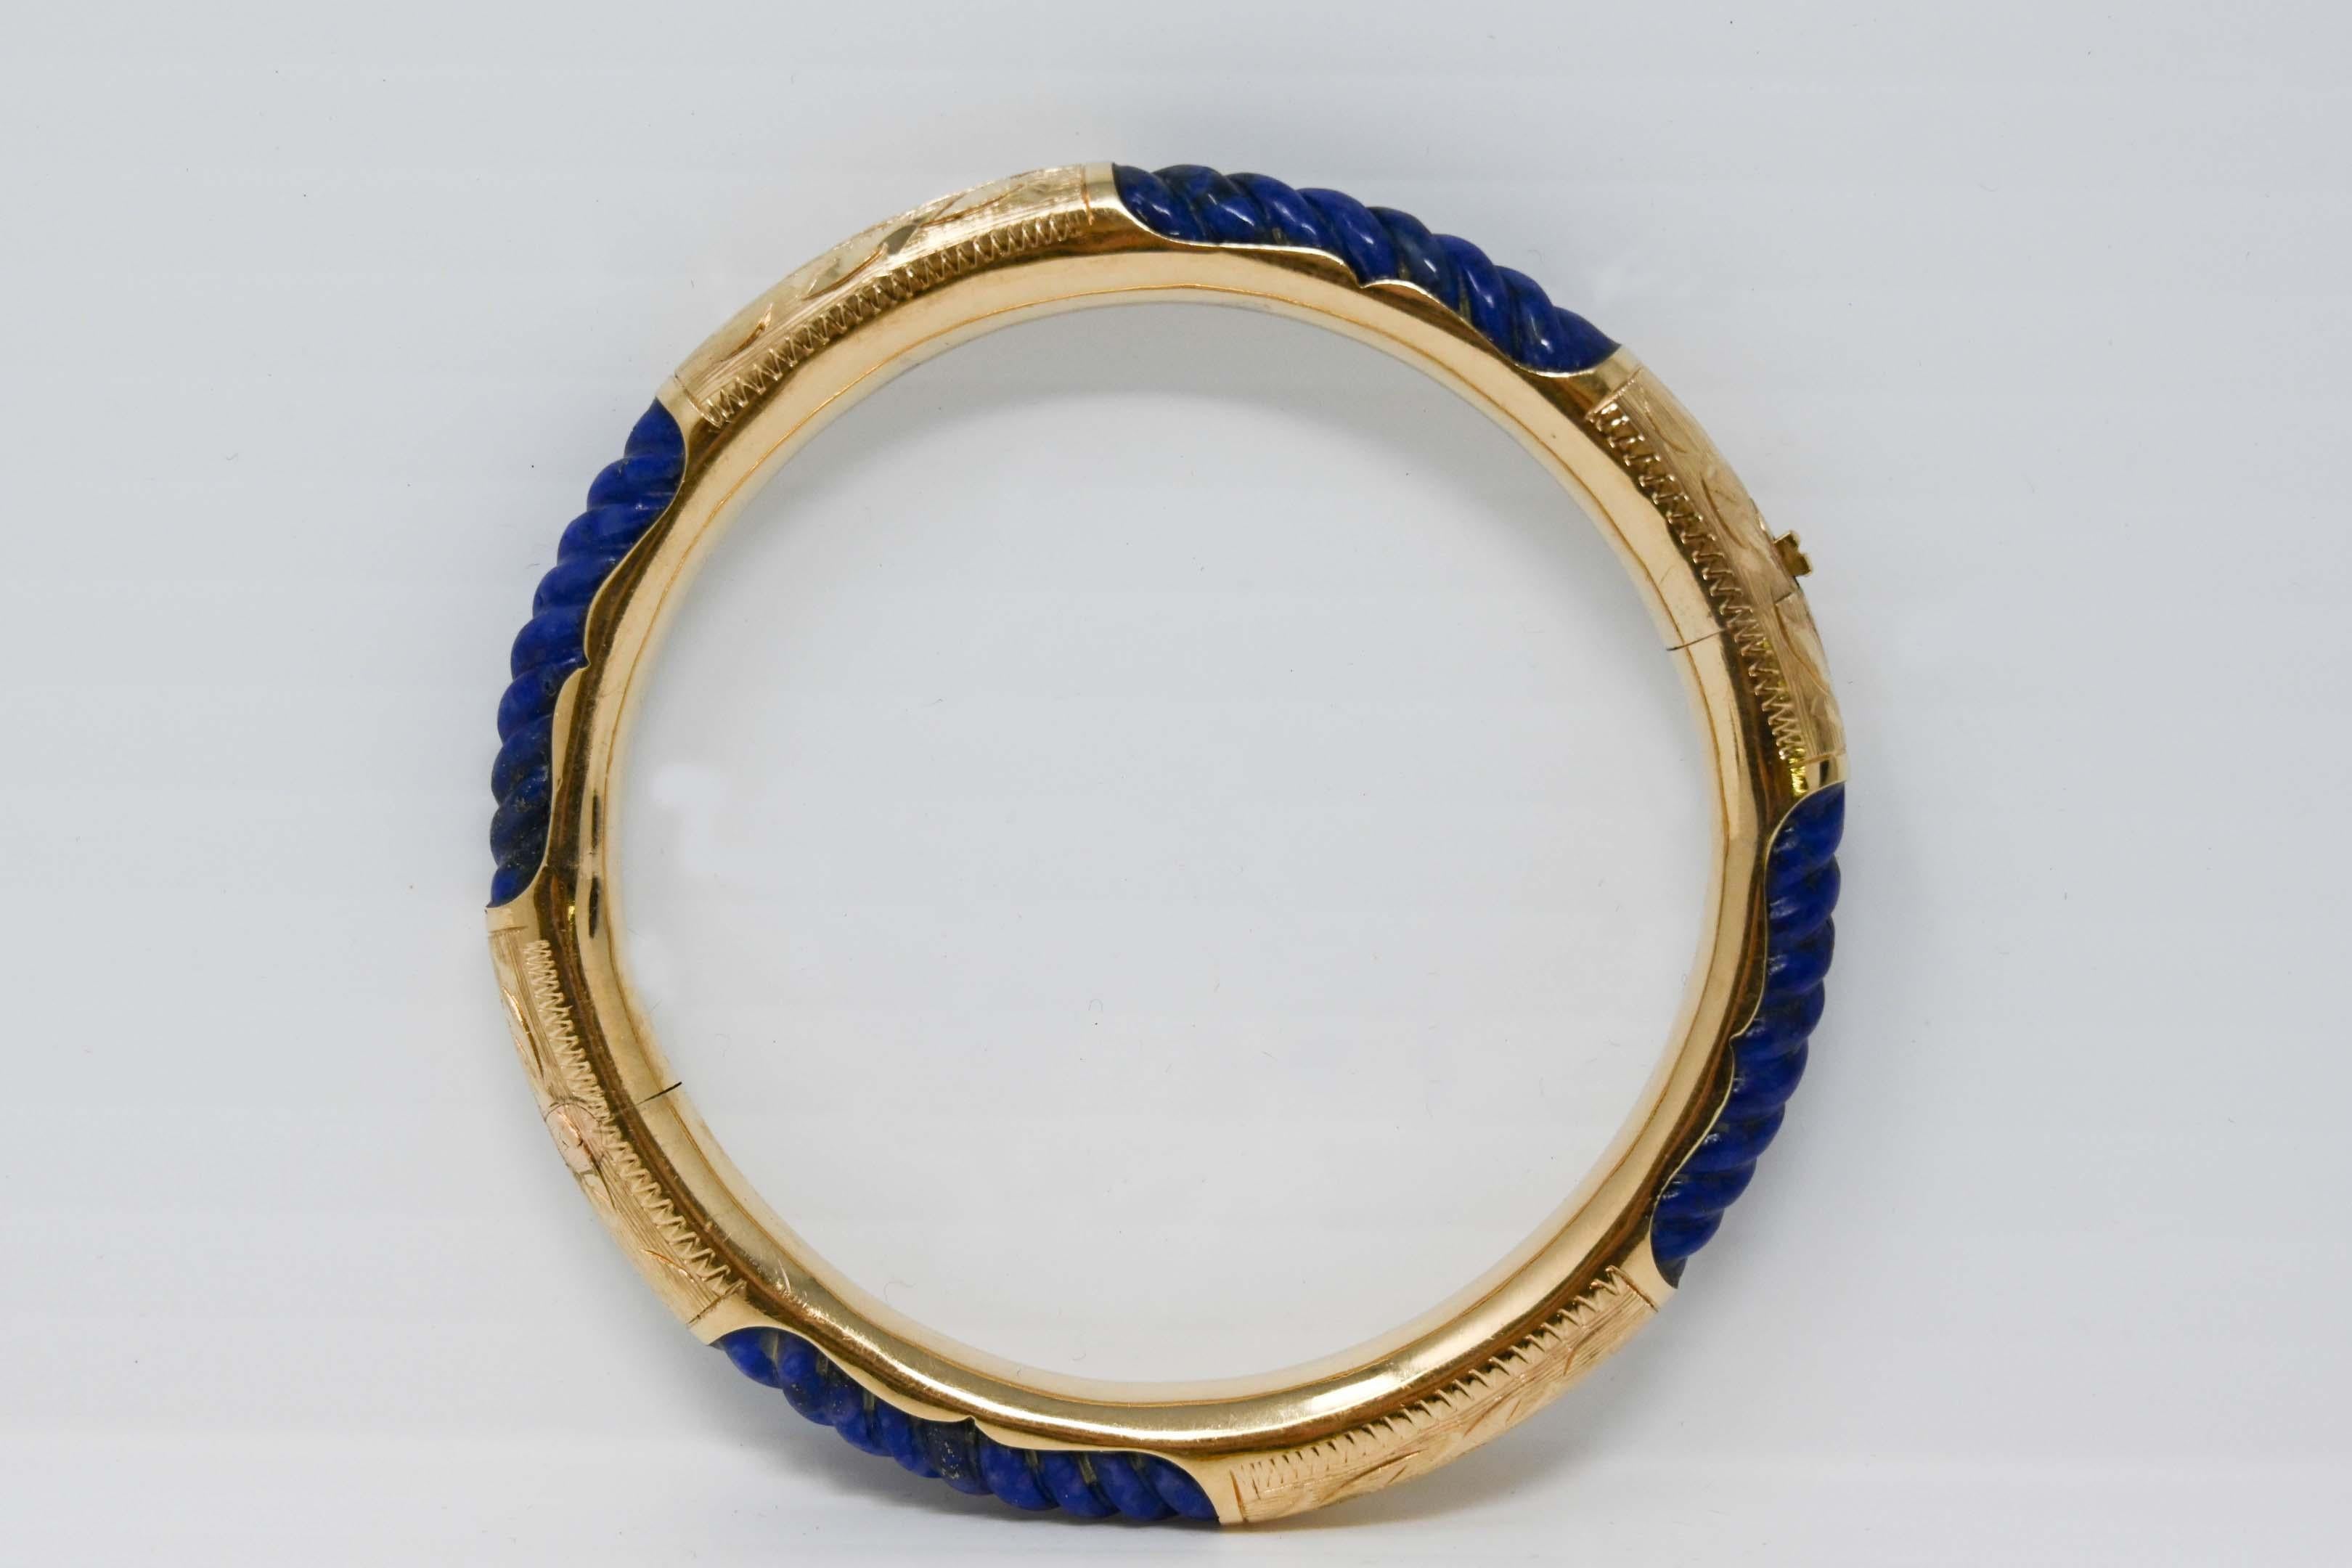 14k yellow gold and twisted Lapis Lazuli stone bangle bracelet. Measures 2 1/4 inches inside diameter and 2 3/4 inches outside. Weighs 23.3 grams. Stamped 14k, maker unknown.
